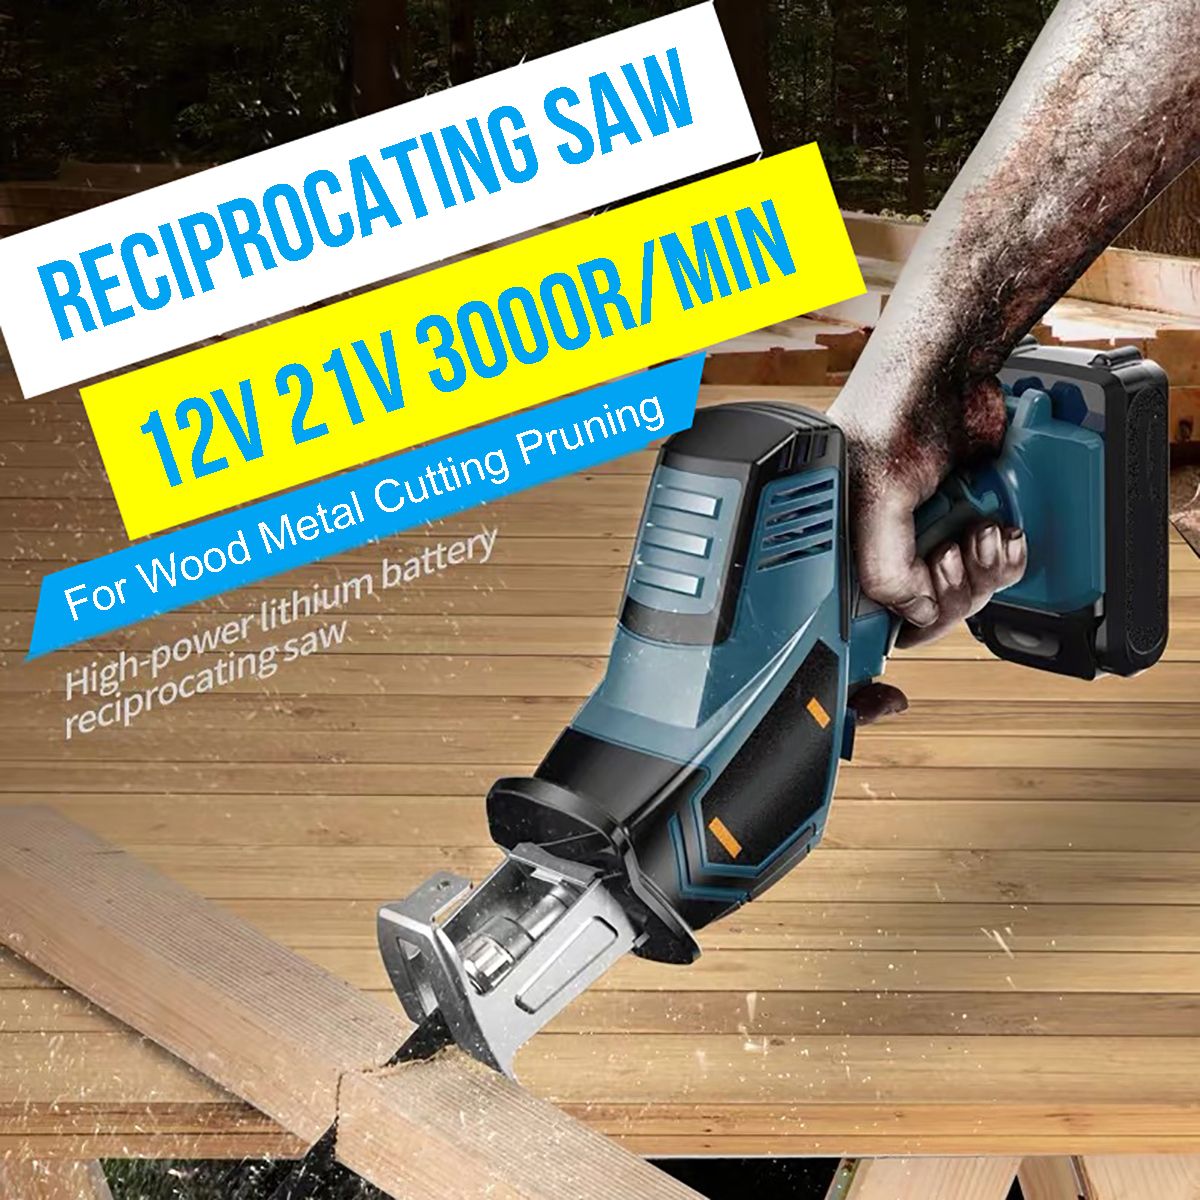 Cordless-Portable-Electric-Reciprocating-Saw-Cutter-Metal-Cutting-Saw-W-1-or-2-Battery-1721112